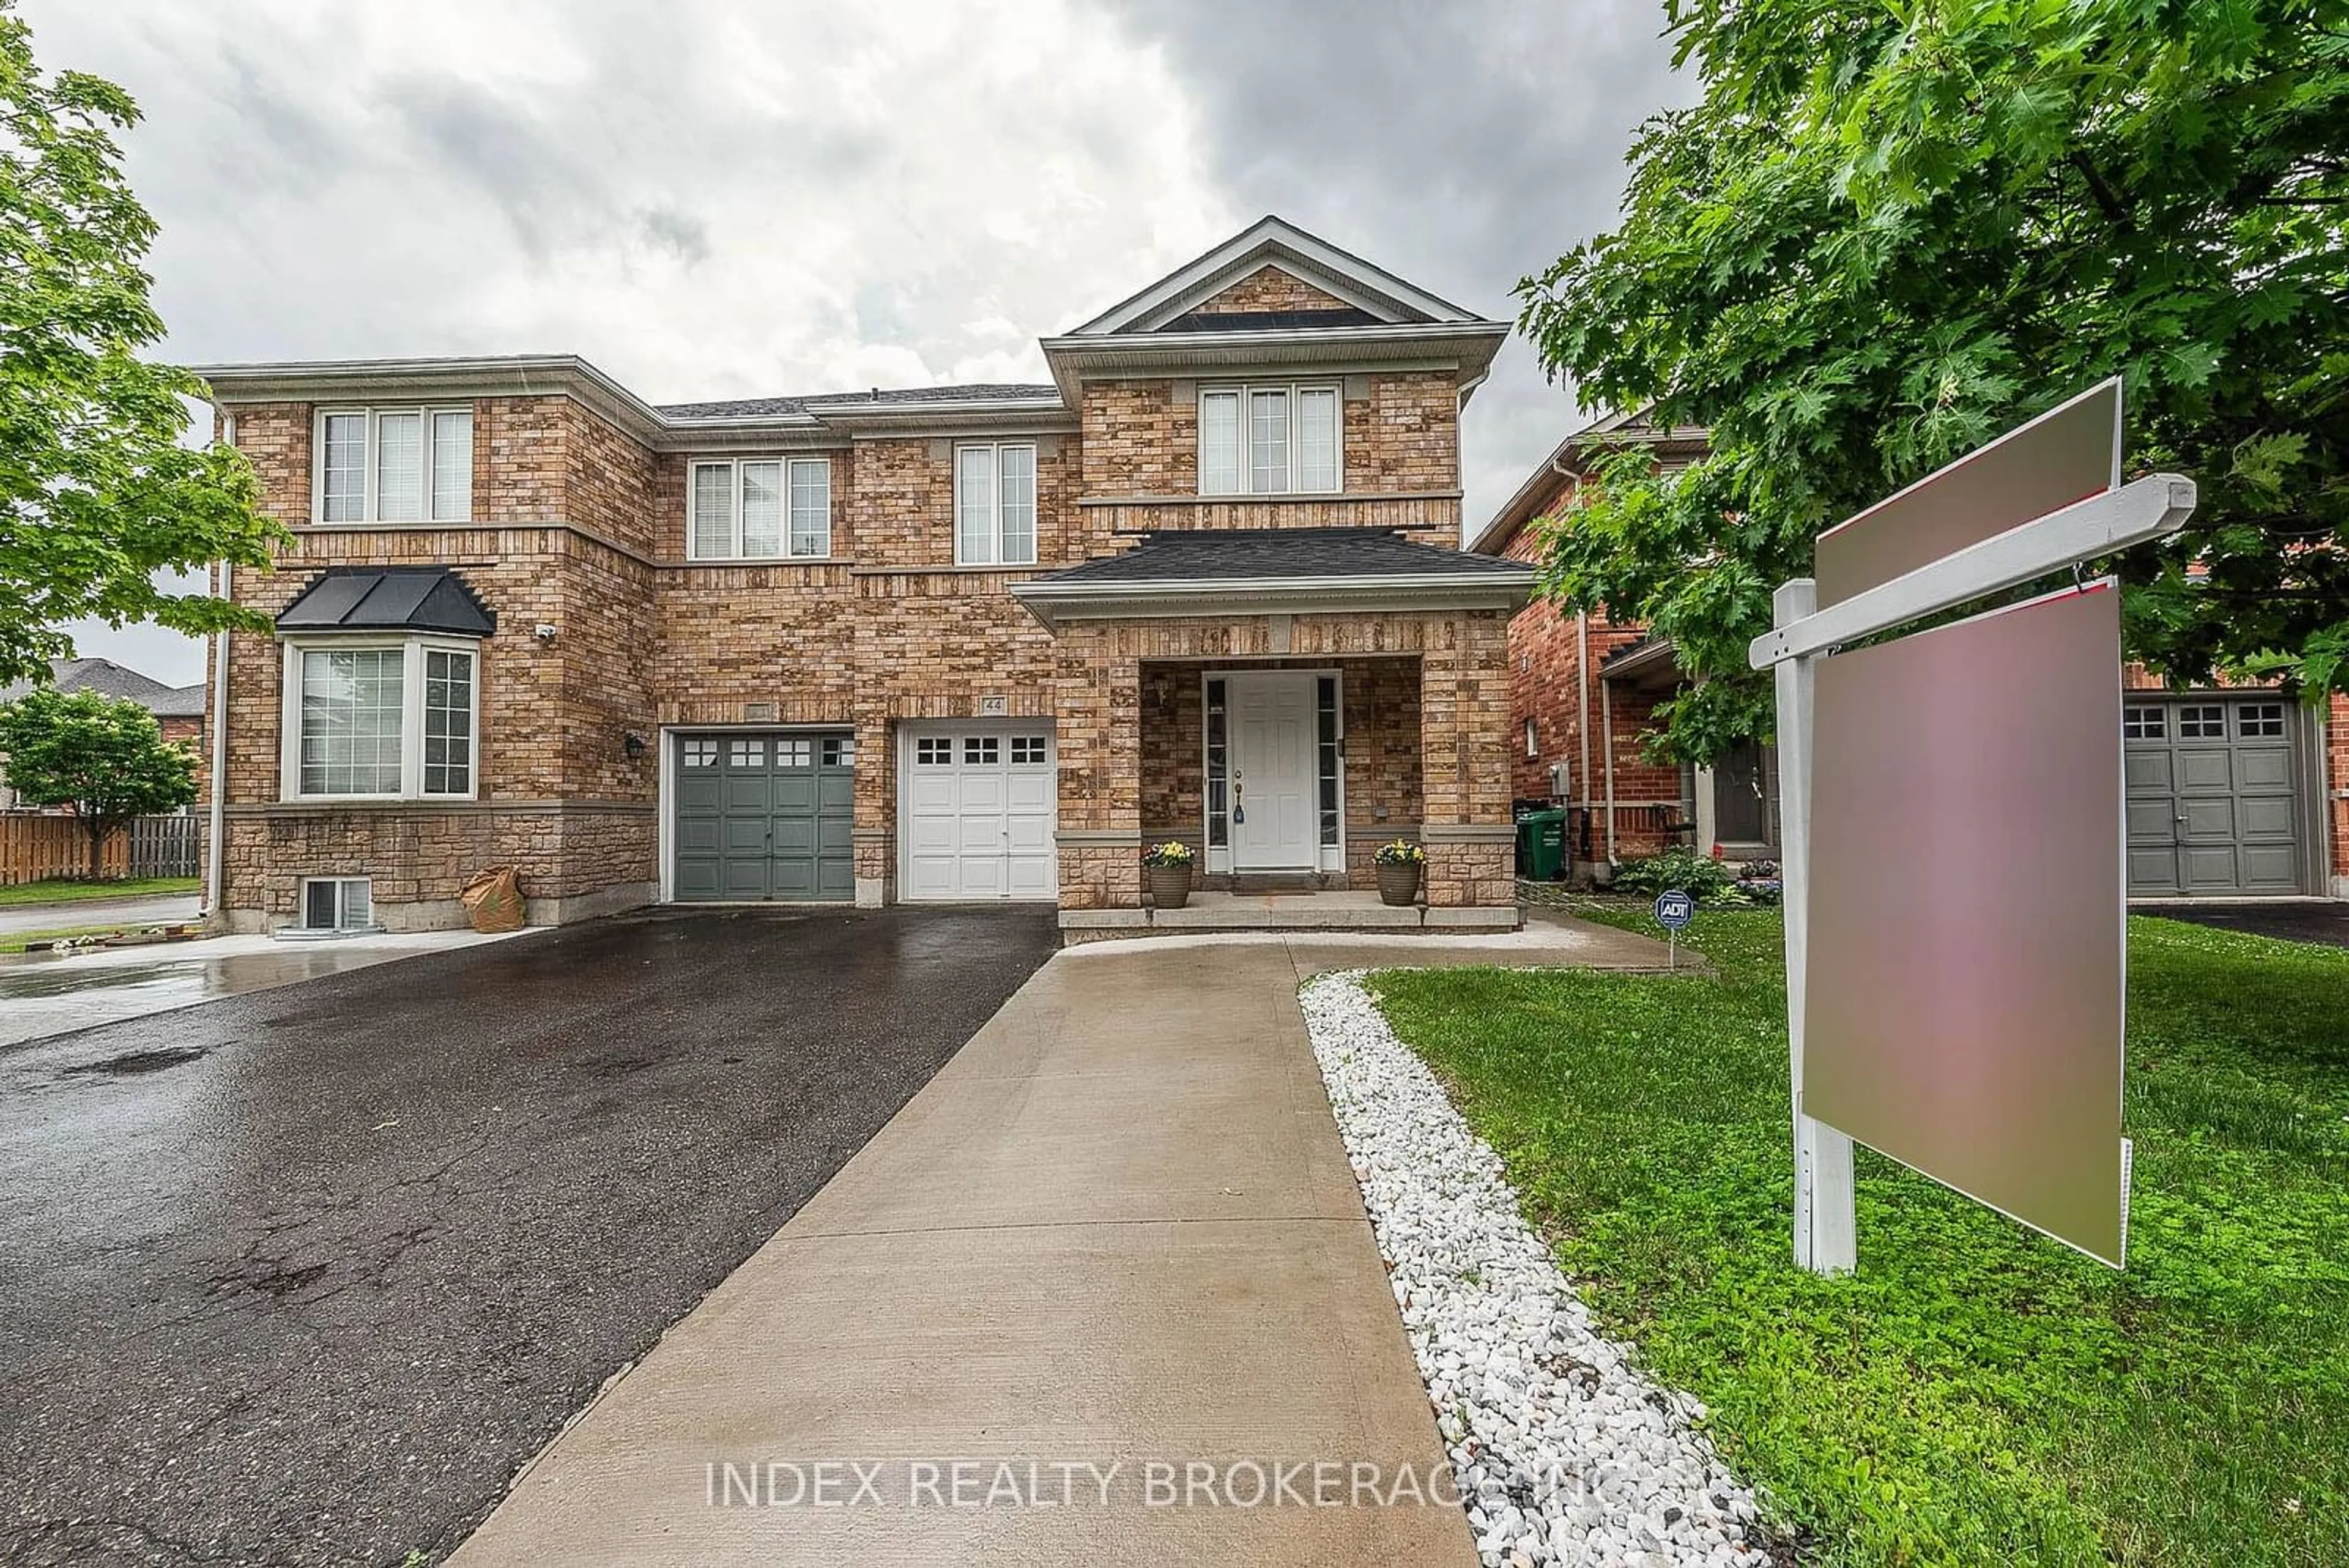 Home with brick exterior material for 44 Silver Egret Rd, Brampton Ontario L7A 3P6